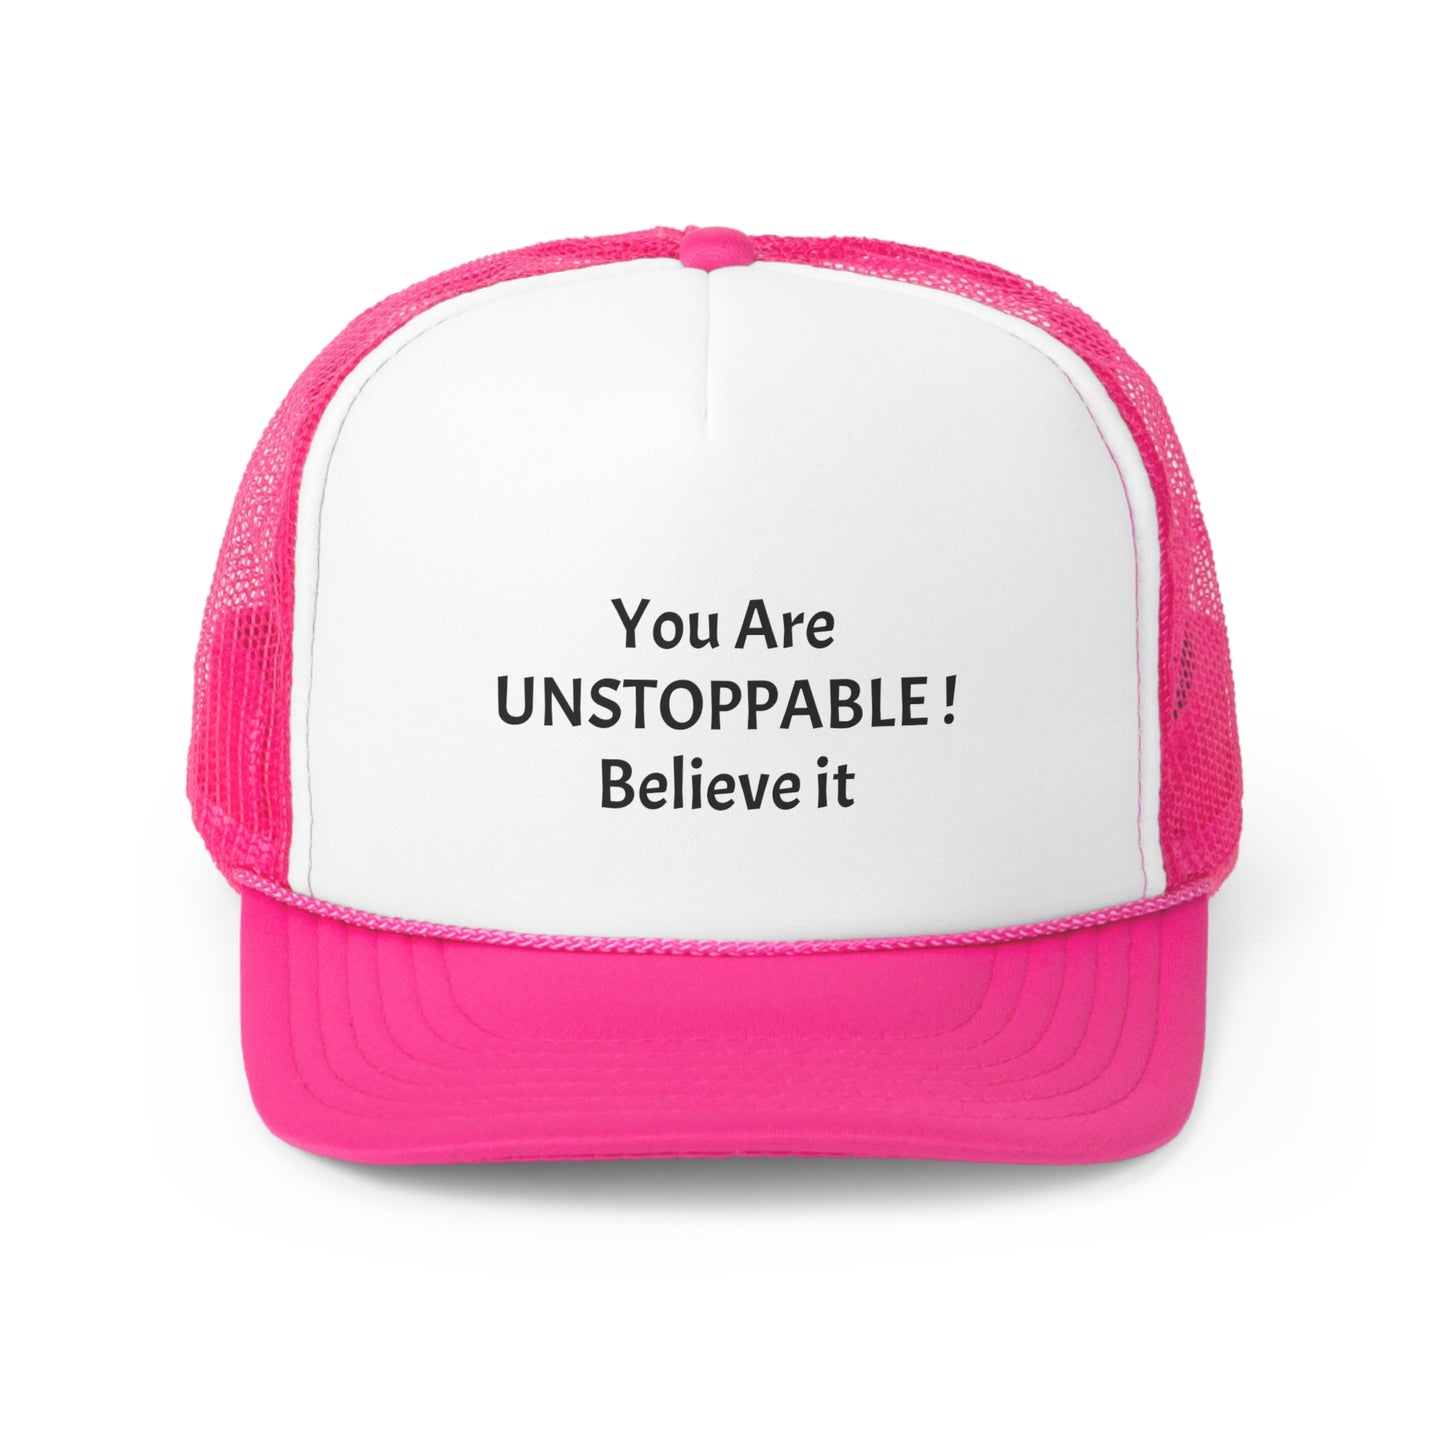 You Are Unstoppable! Trucker cap.